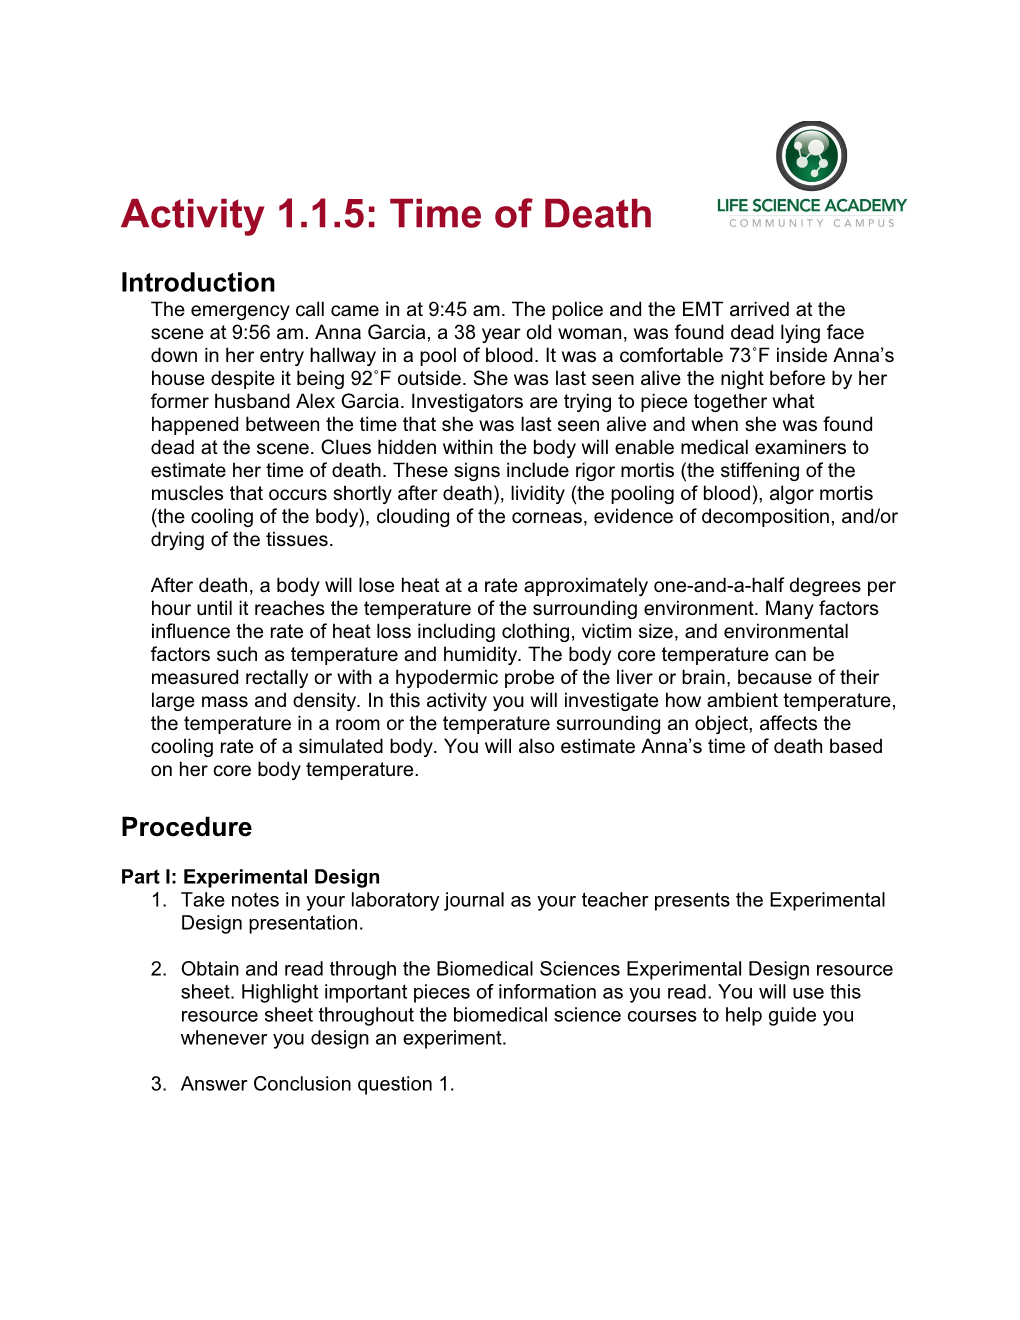 Activity 1.1.5: Time of Death